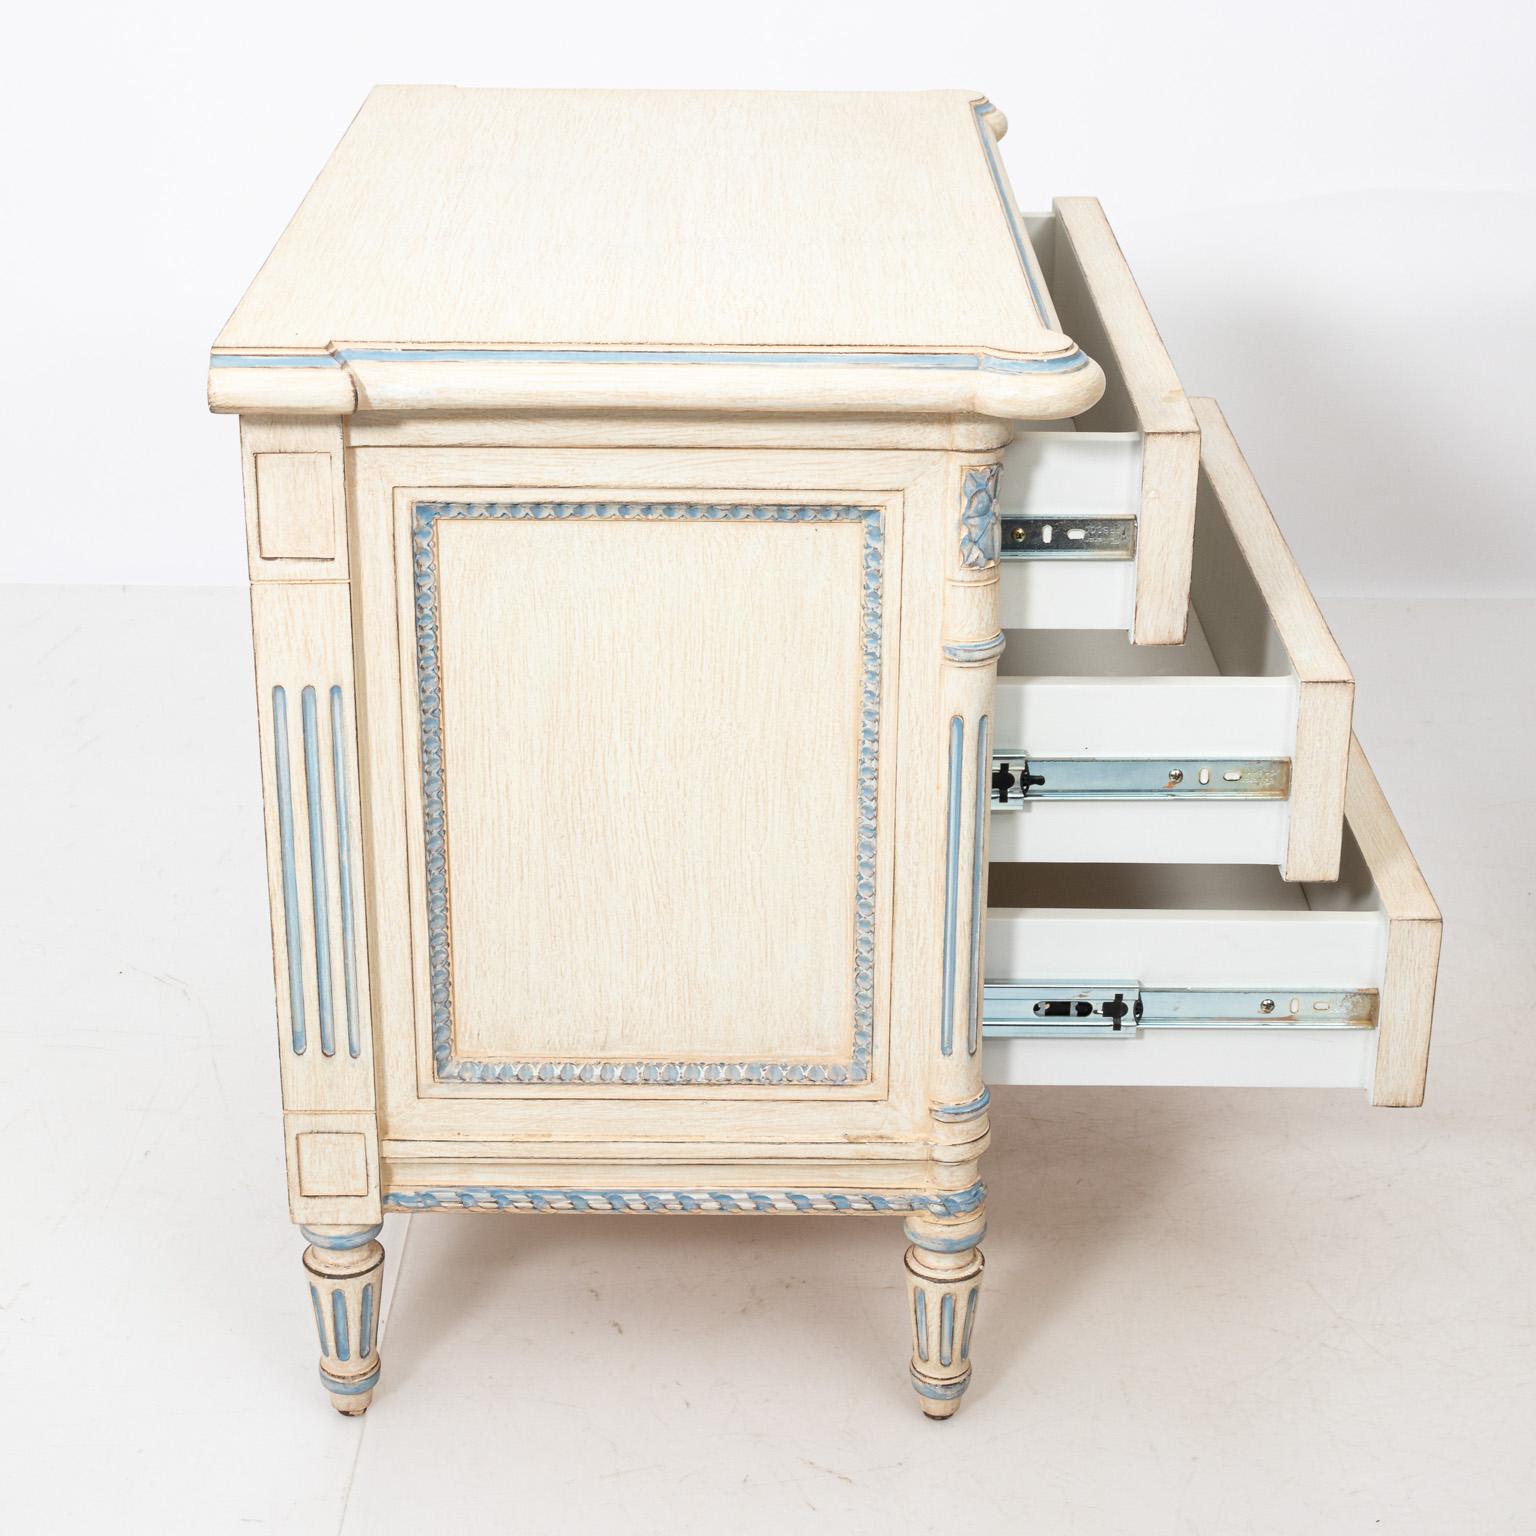 Louis XV style pair of cream painted bedside tables or commodes with three drawers and metal hardware in the manner of Julia Gray, circa 1980s. They also feature blue accent trim and carved rosettes. Please note of wear consistent with age. Made in